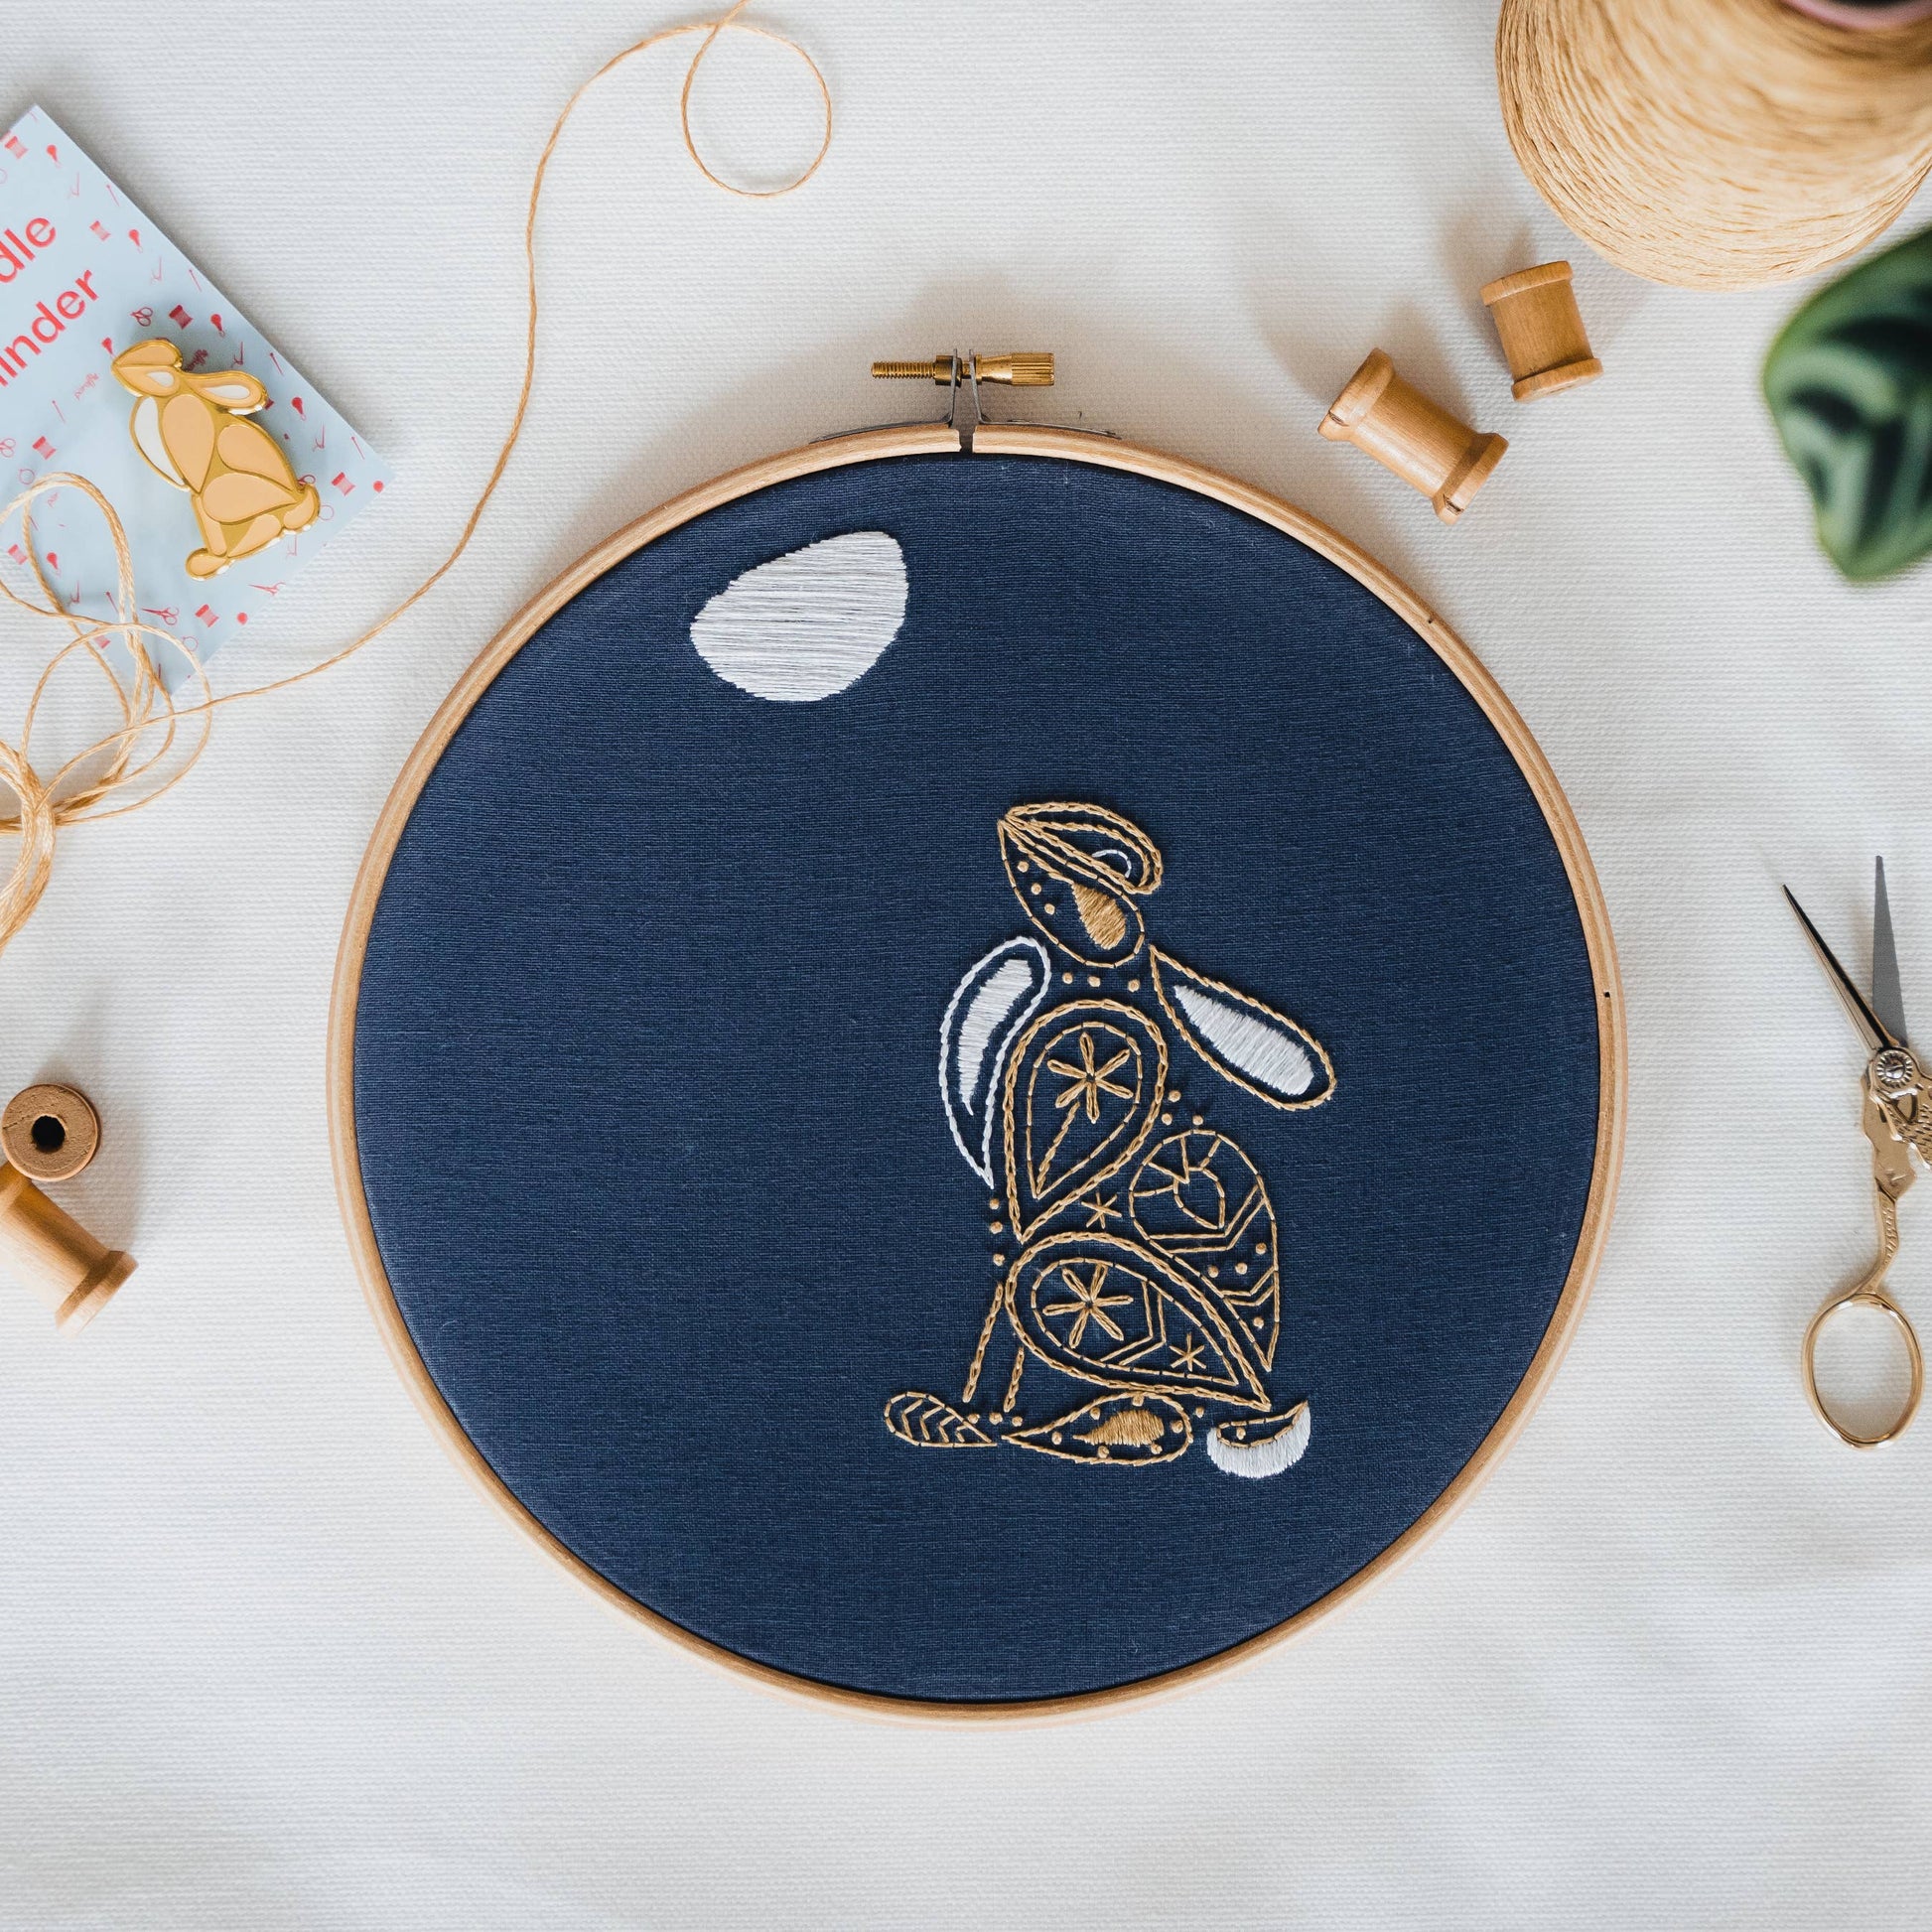 Moon Gazing Hare Embroidery Kit - homesewn